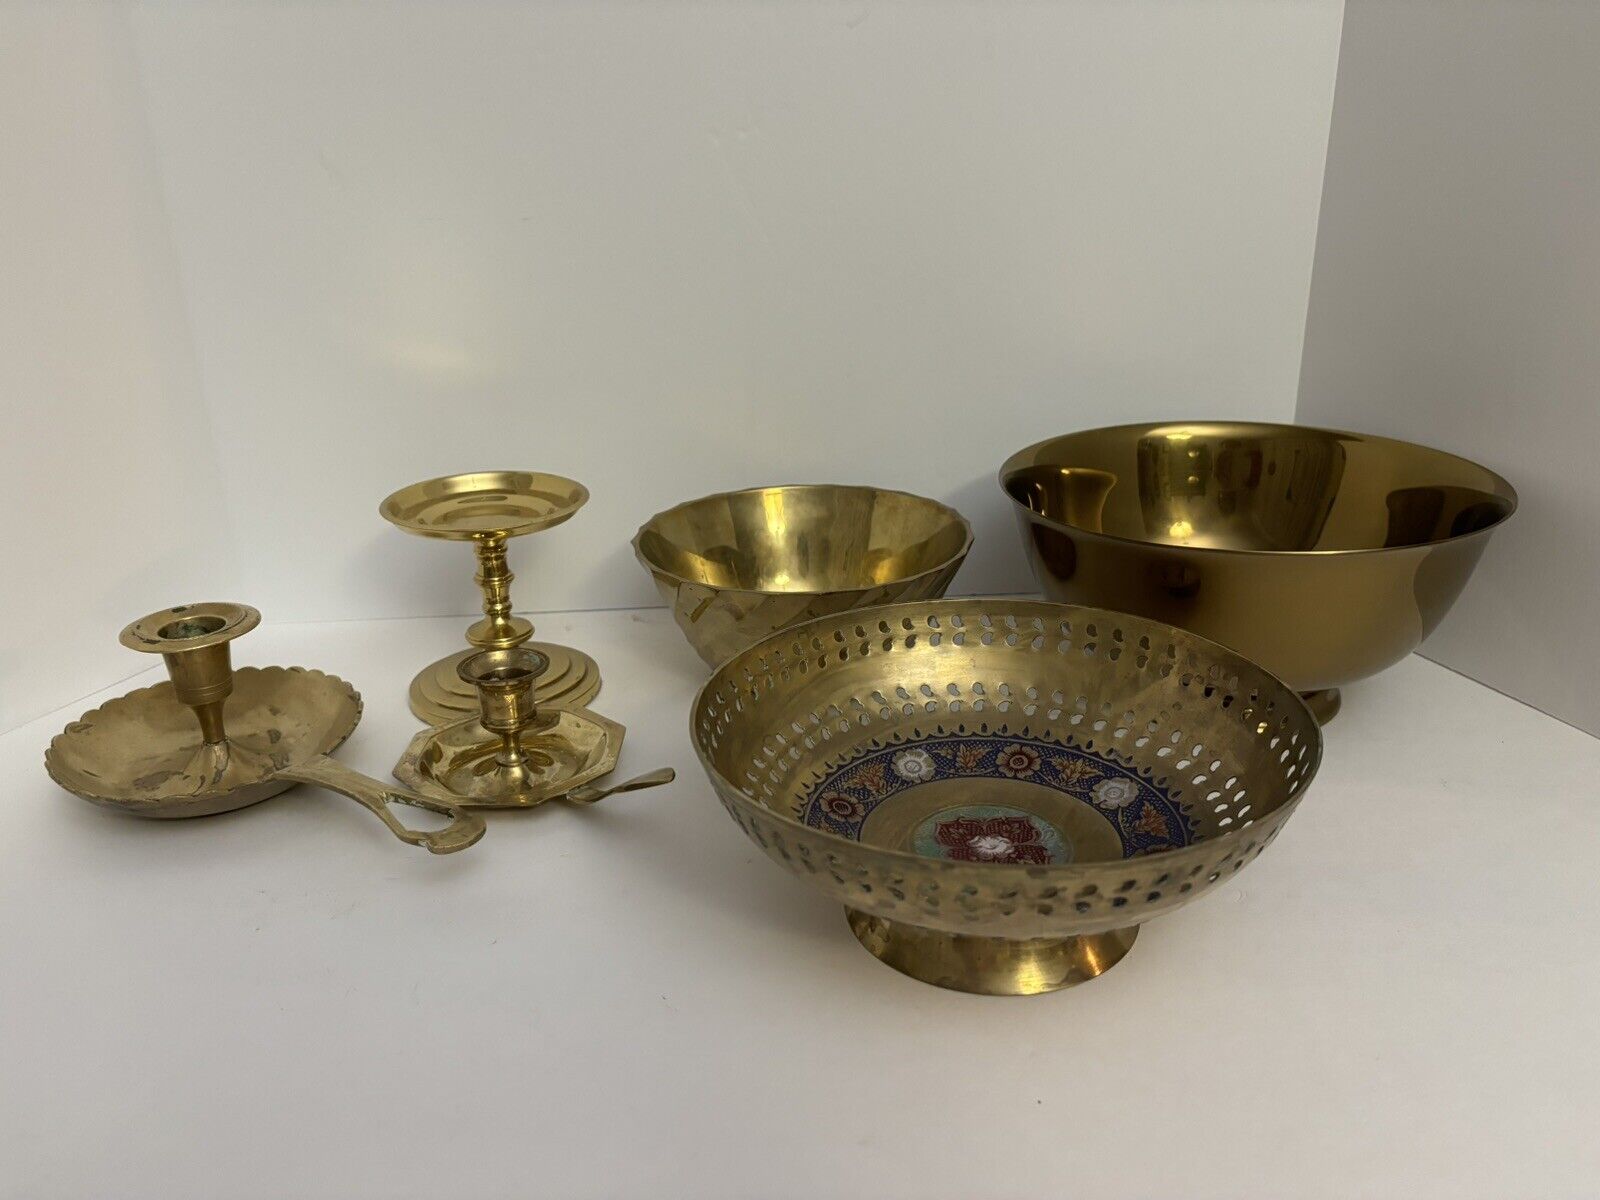 Vintage Lot Of 3 Solid Brass Bowls And 3 Brass Candle Sticks